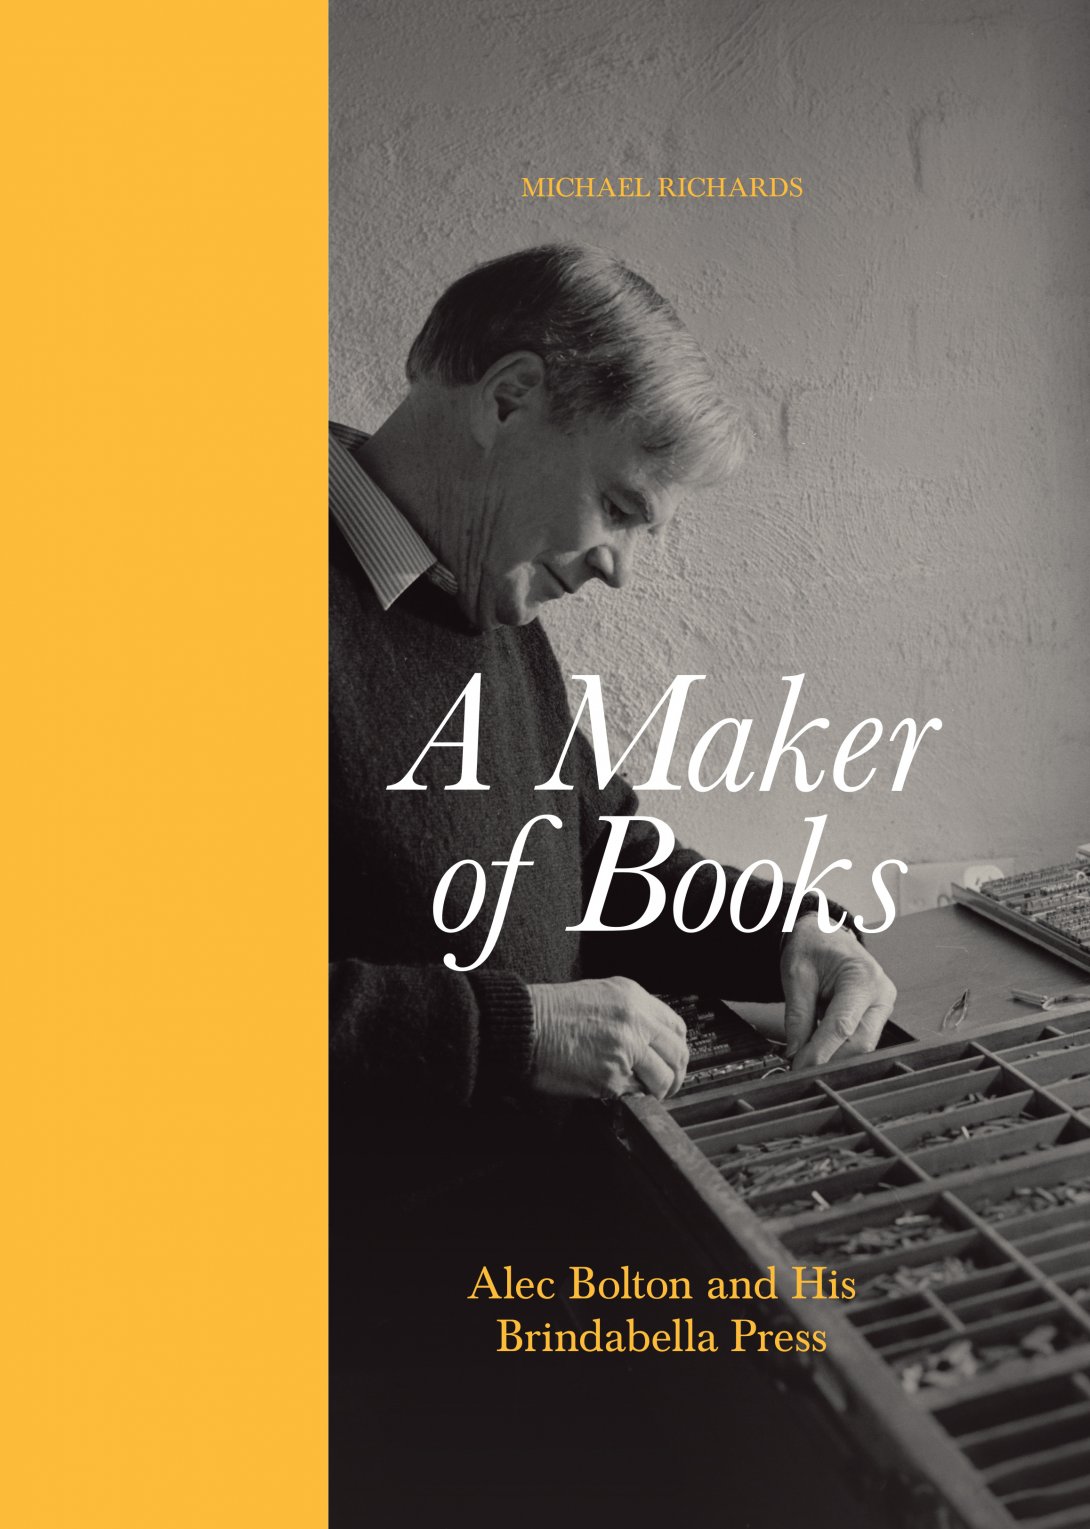 Book cover of 'A Maker of Books: Alec Bolton and His Brindabella Press' by Michael Richards